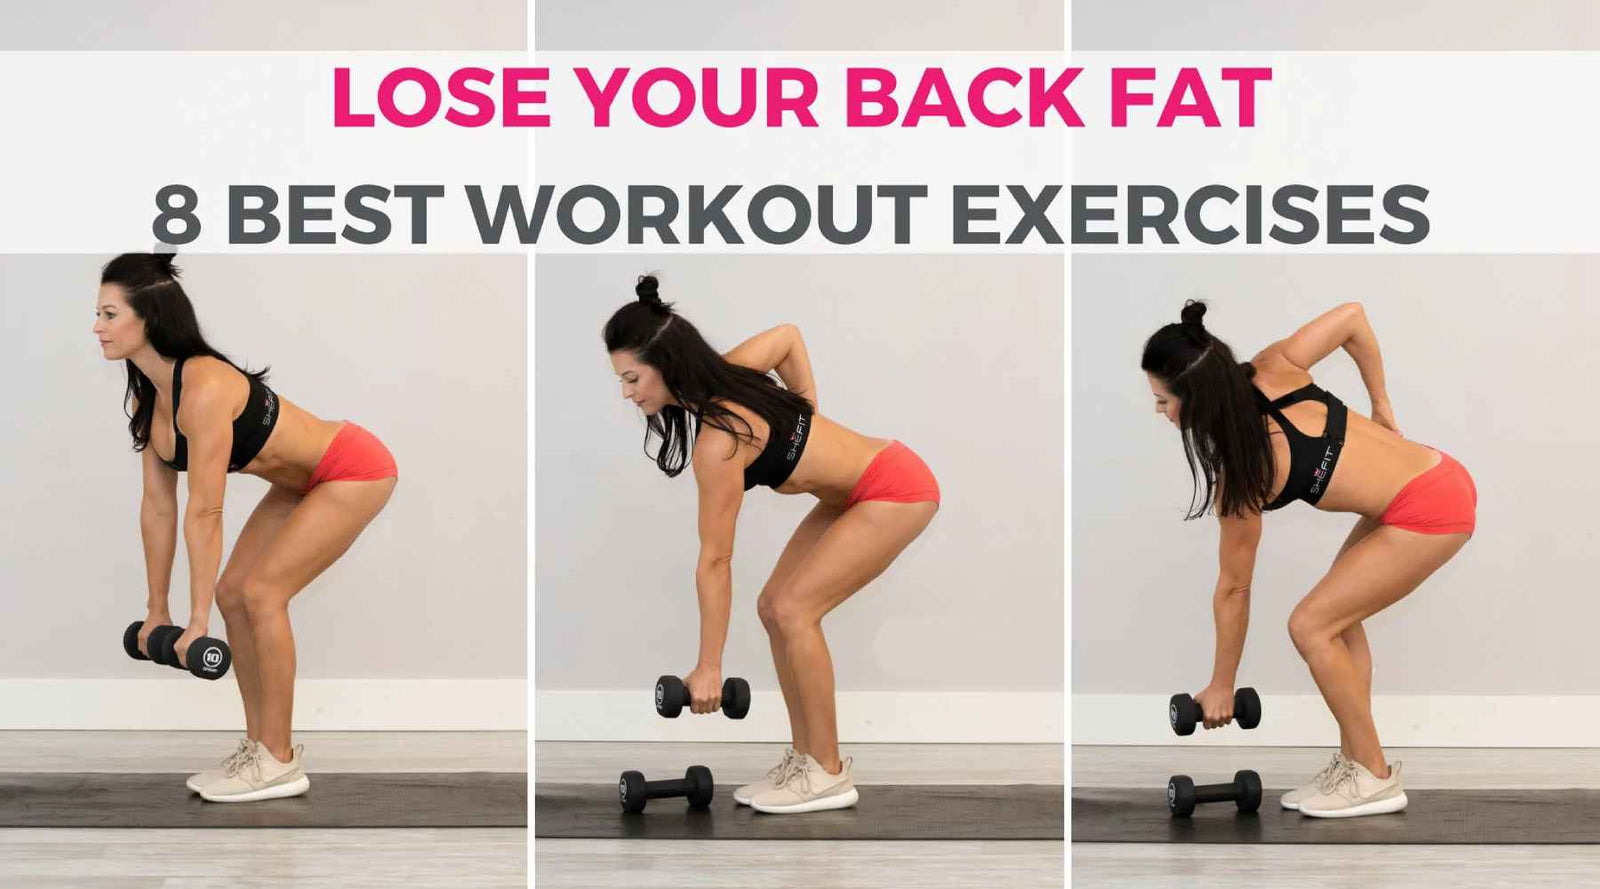 8 Awesome Exercises for Back Workouts at Home - SHEFIT